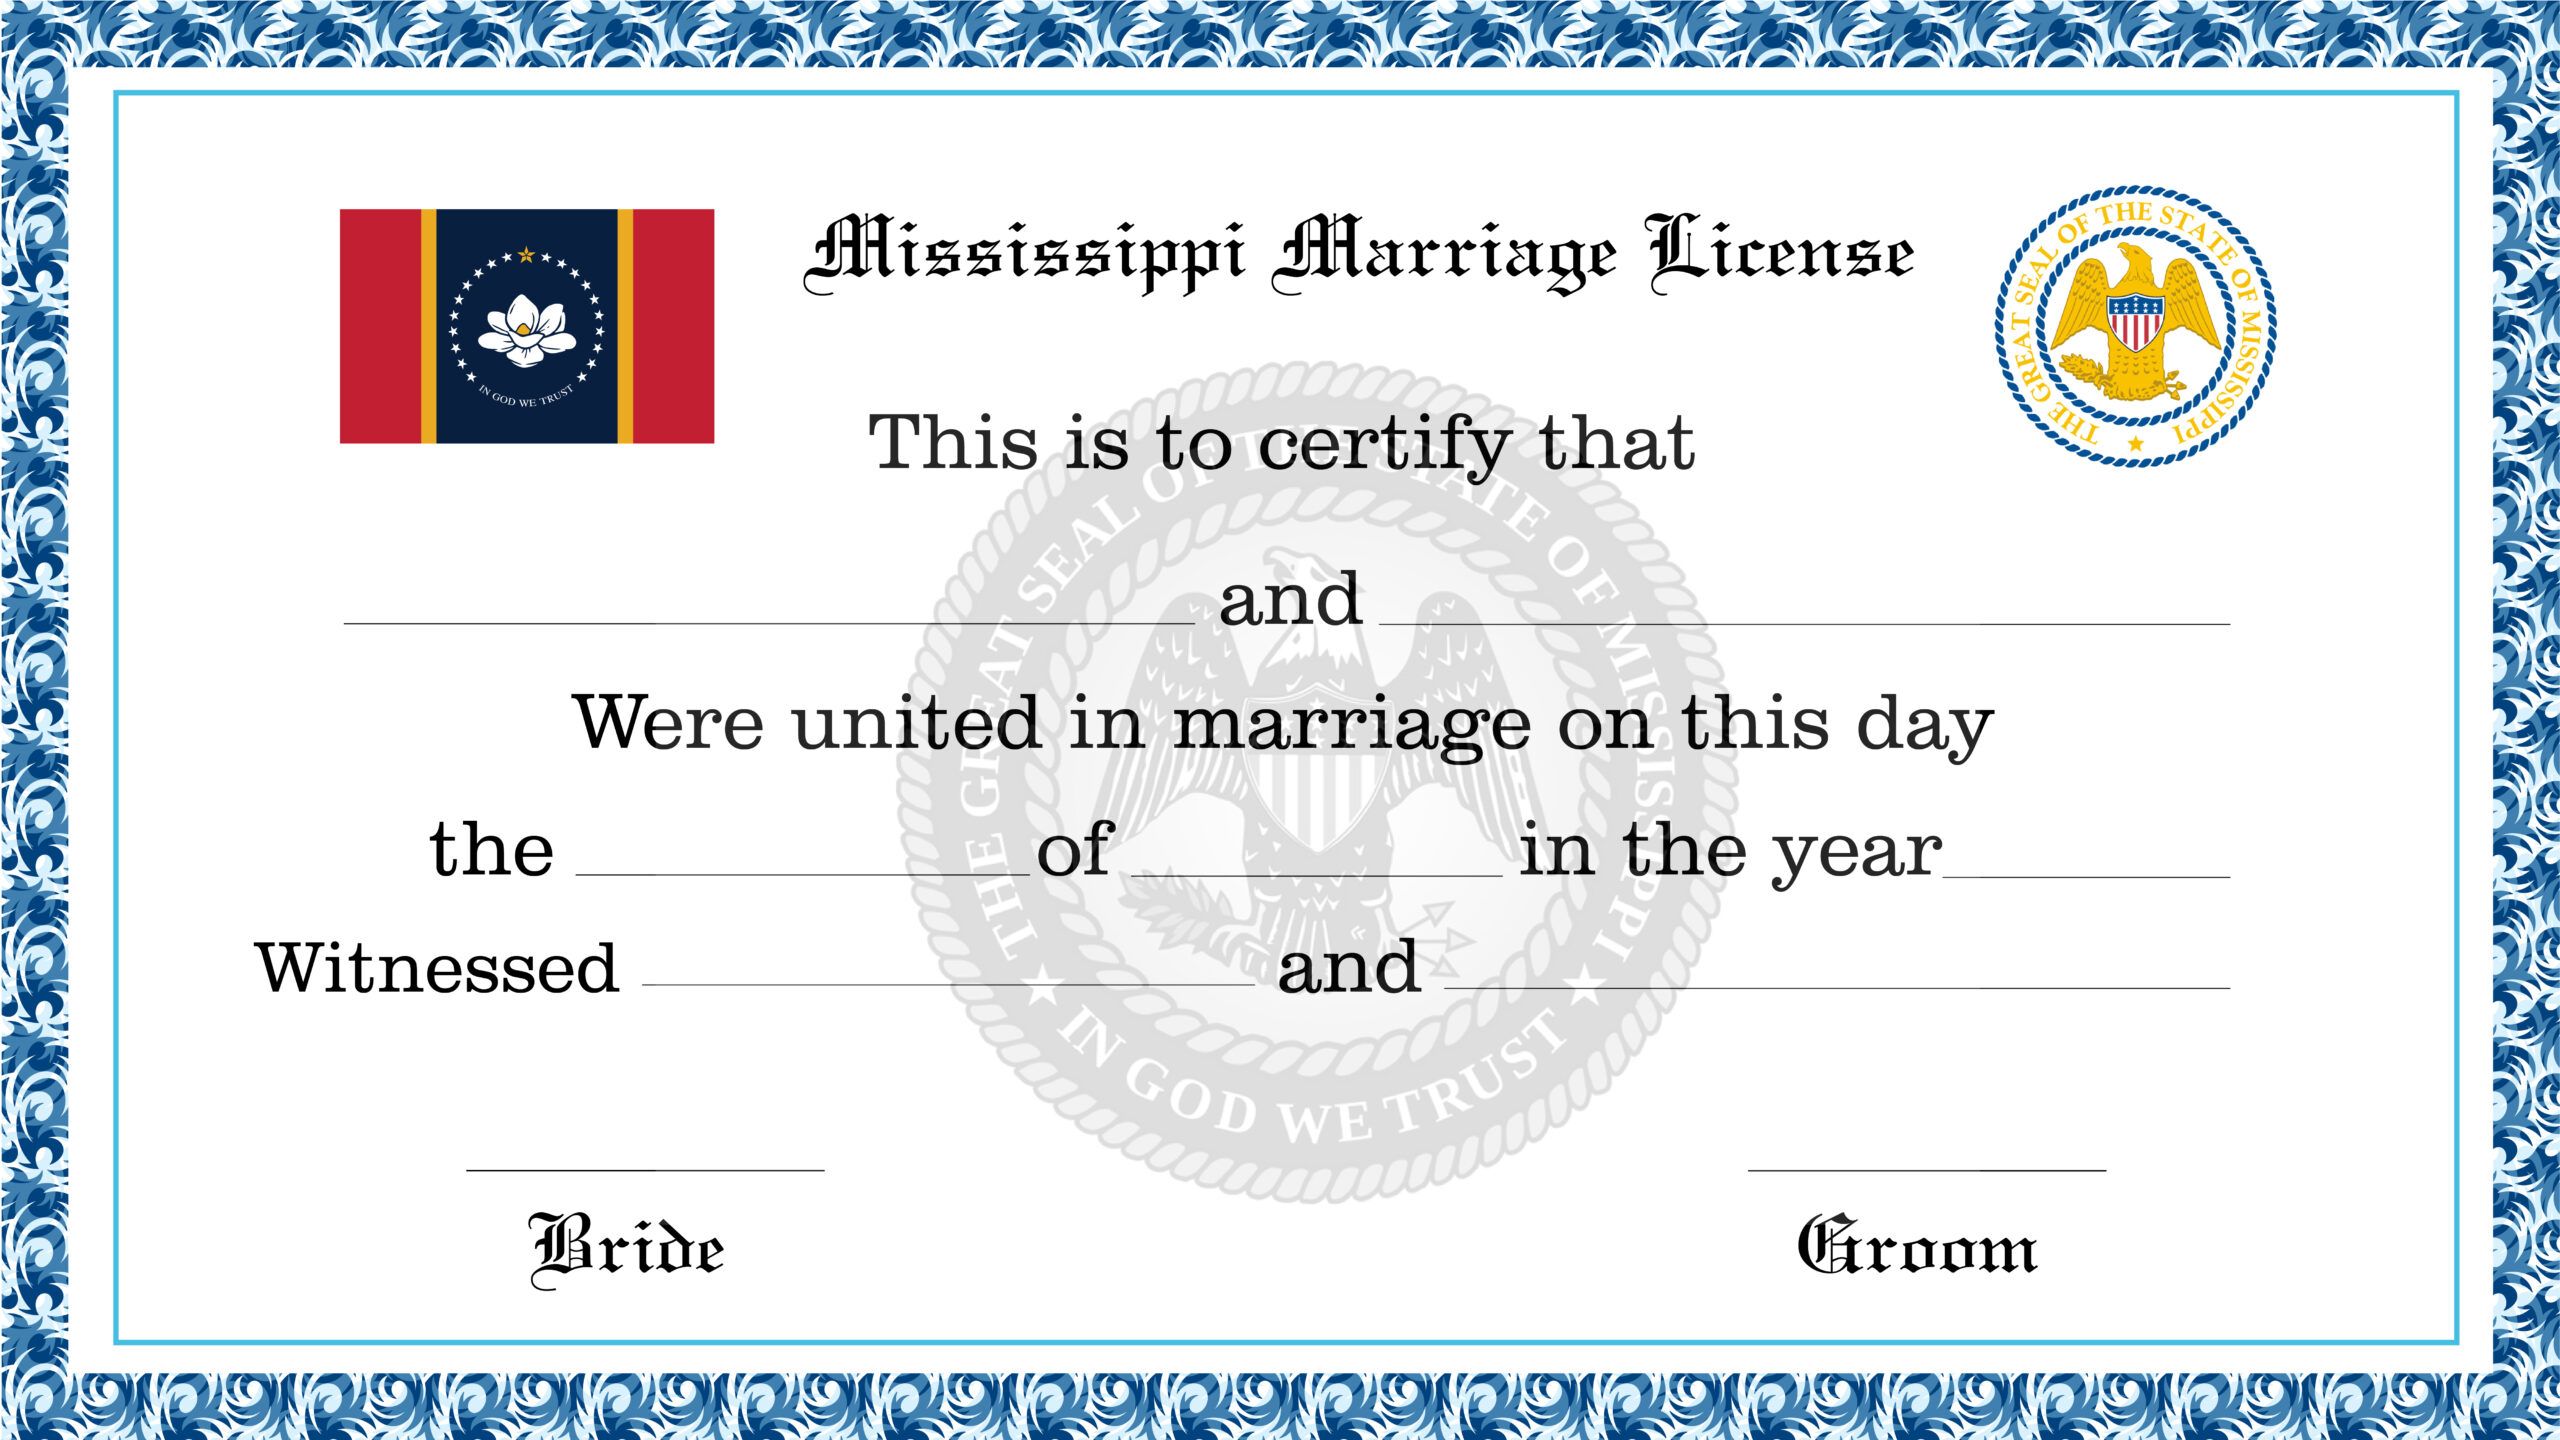 Mississippi Marriage License Application Form